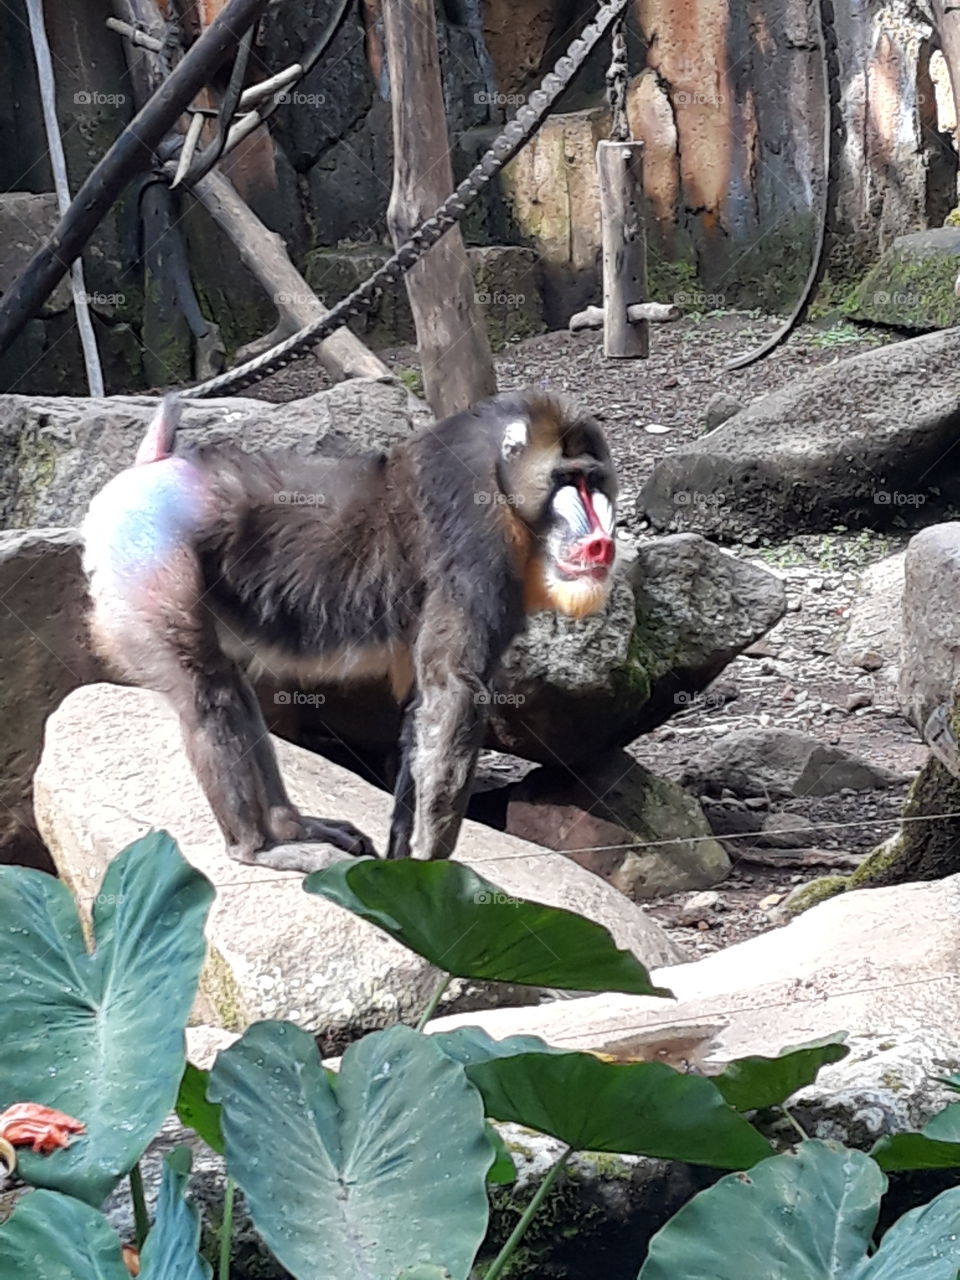 Monkey's sexy pose, when you realize someone try to capture your picture.